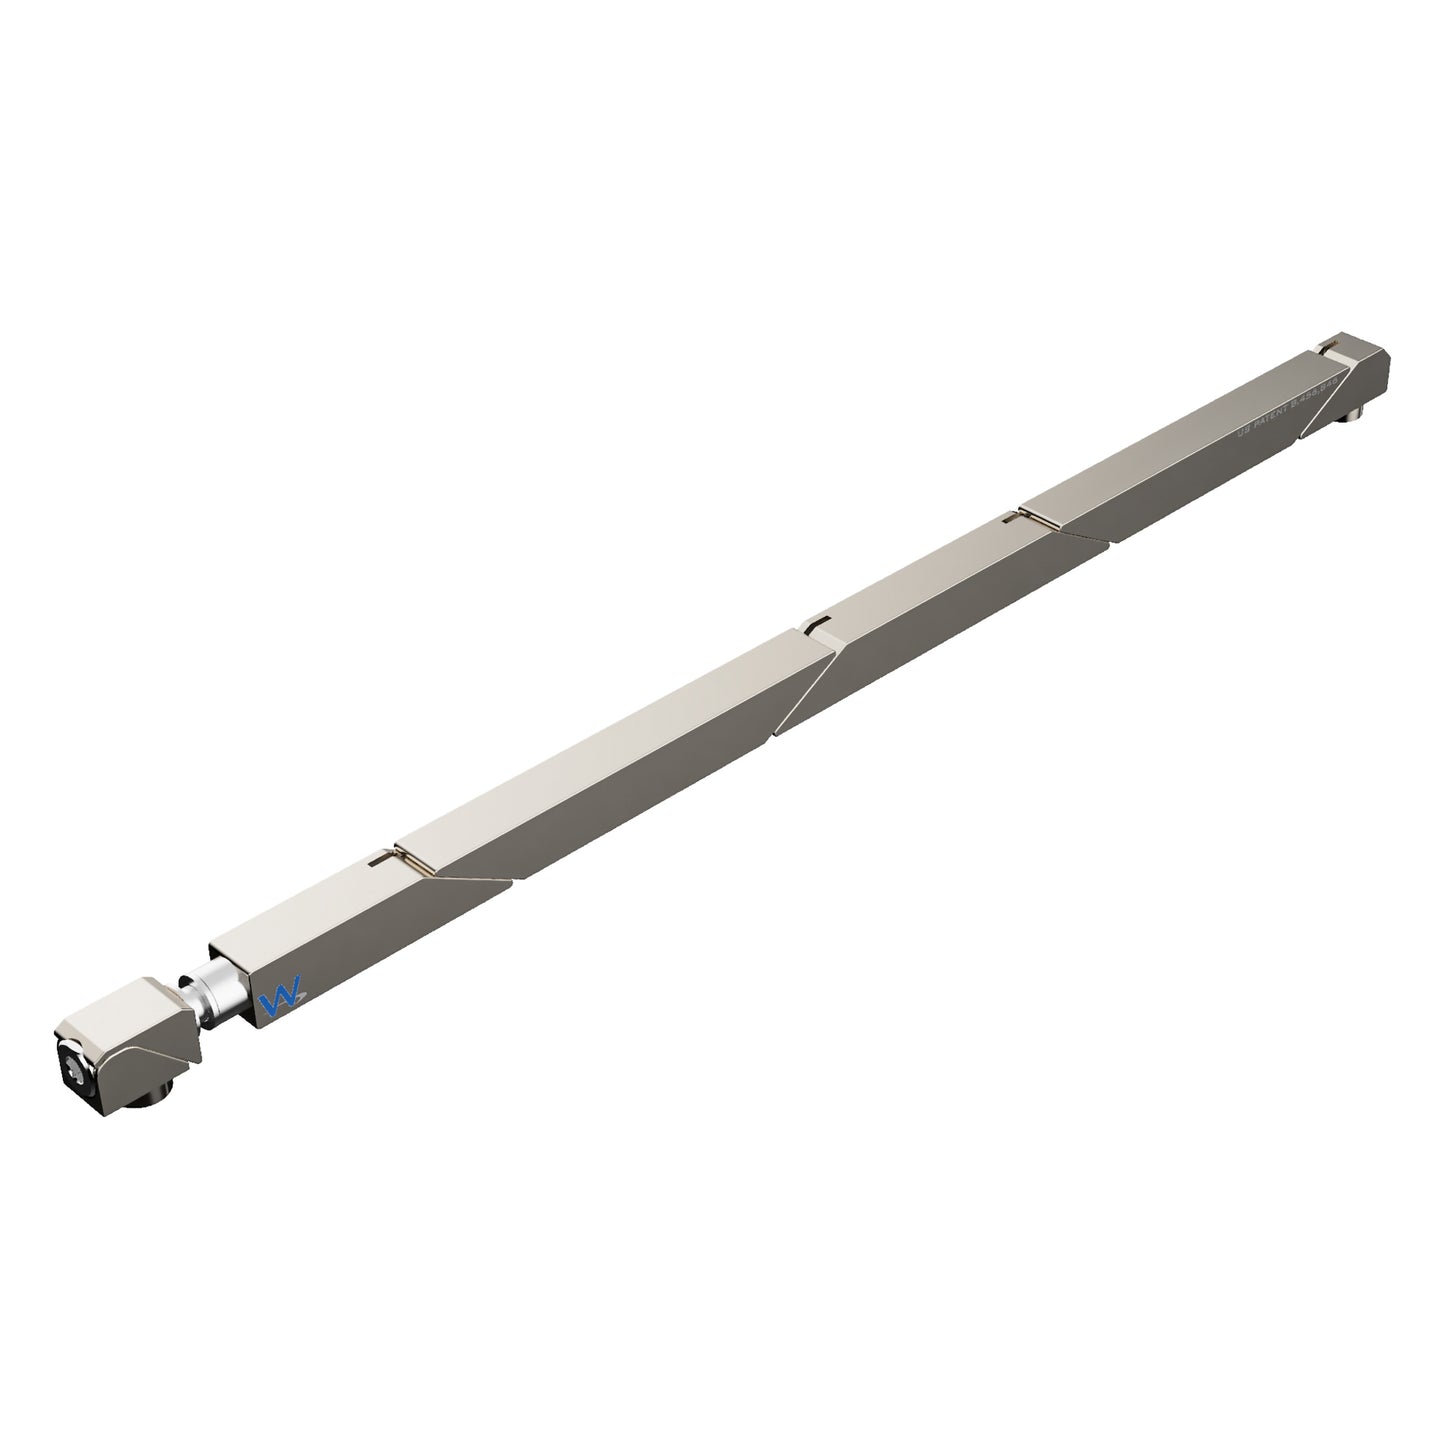 SW7-70-270-250 Max Force Big Boss Wedgelock, segmented long rectulangular hardware component, Electroless Nickel Plated